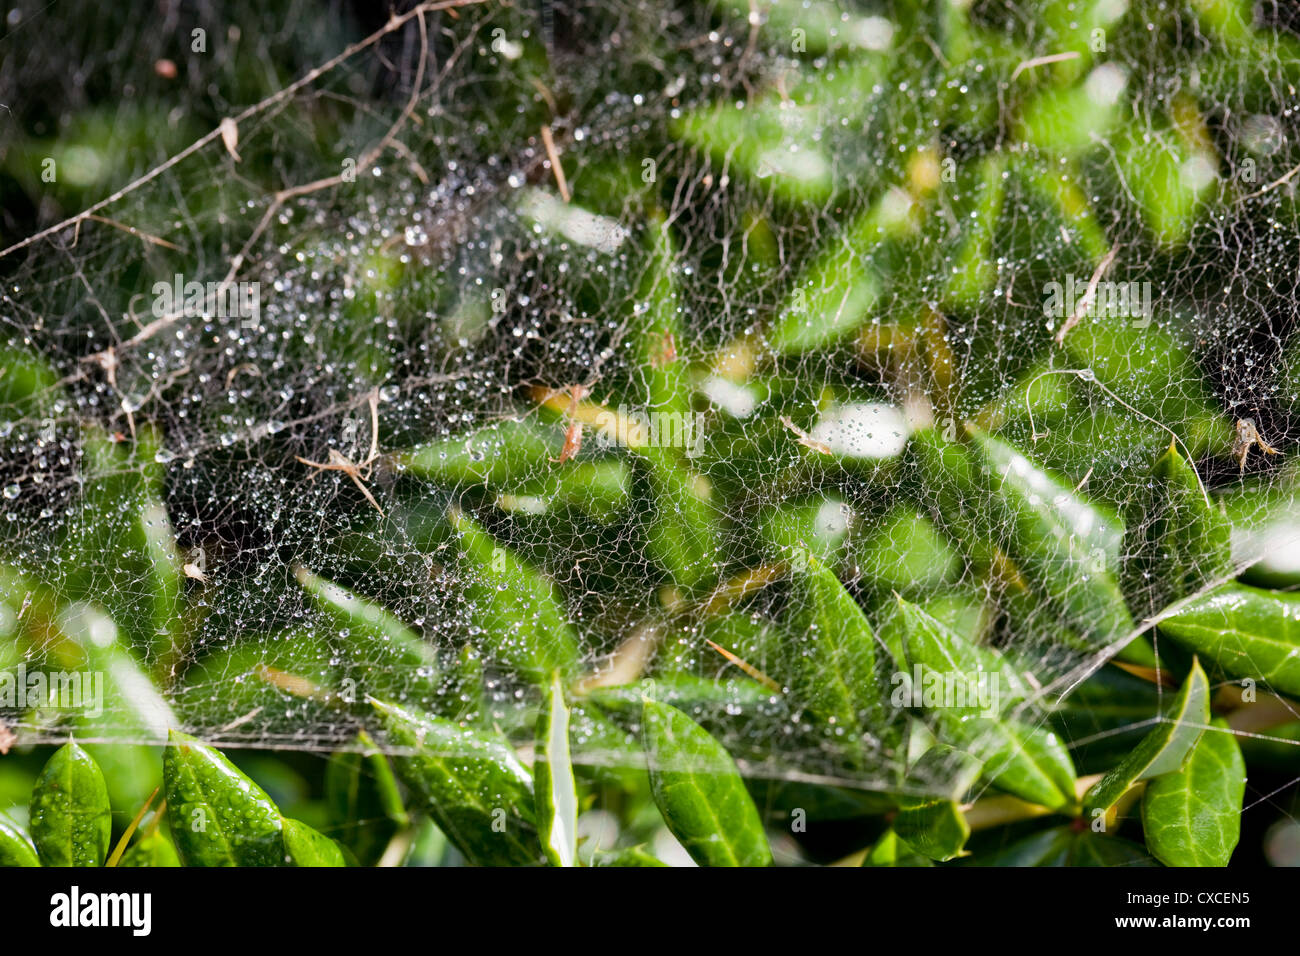 'Money' Spider or 'Sheetweaver' Spider (Linyphid sp. ) Multiple hammock webs stretching across branches of garden shrub. Stock Photo